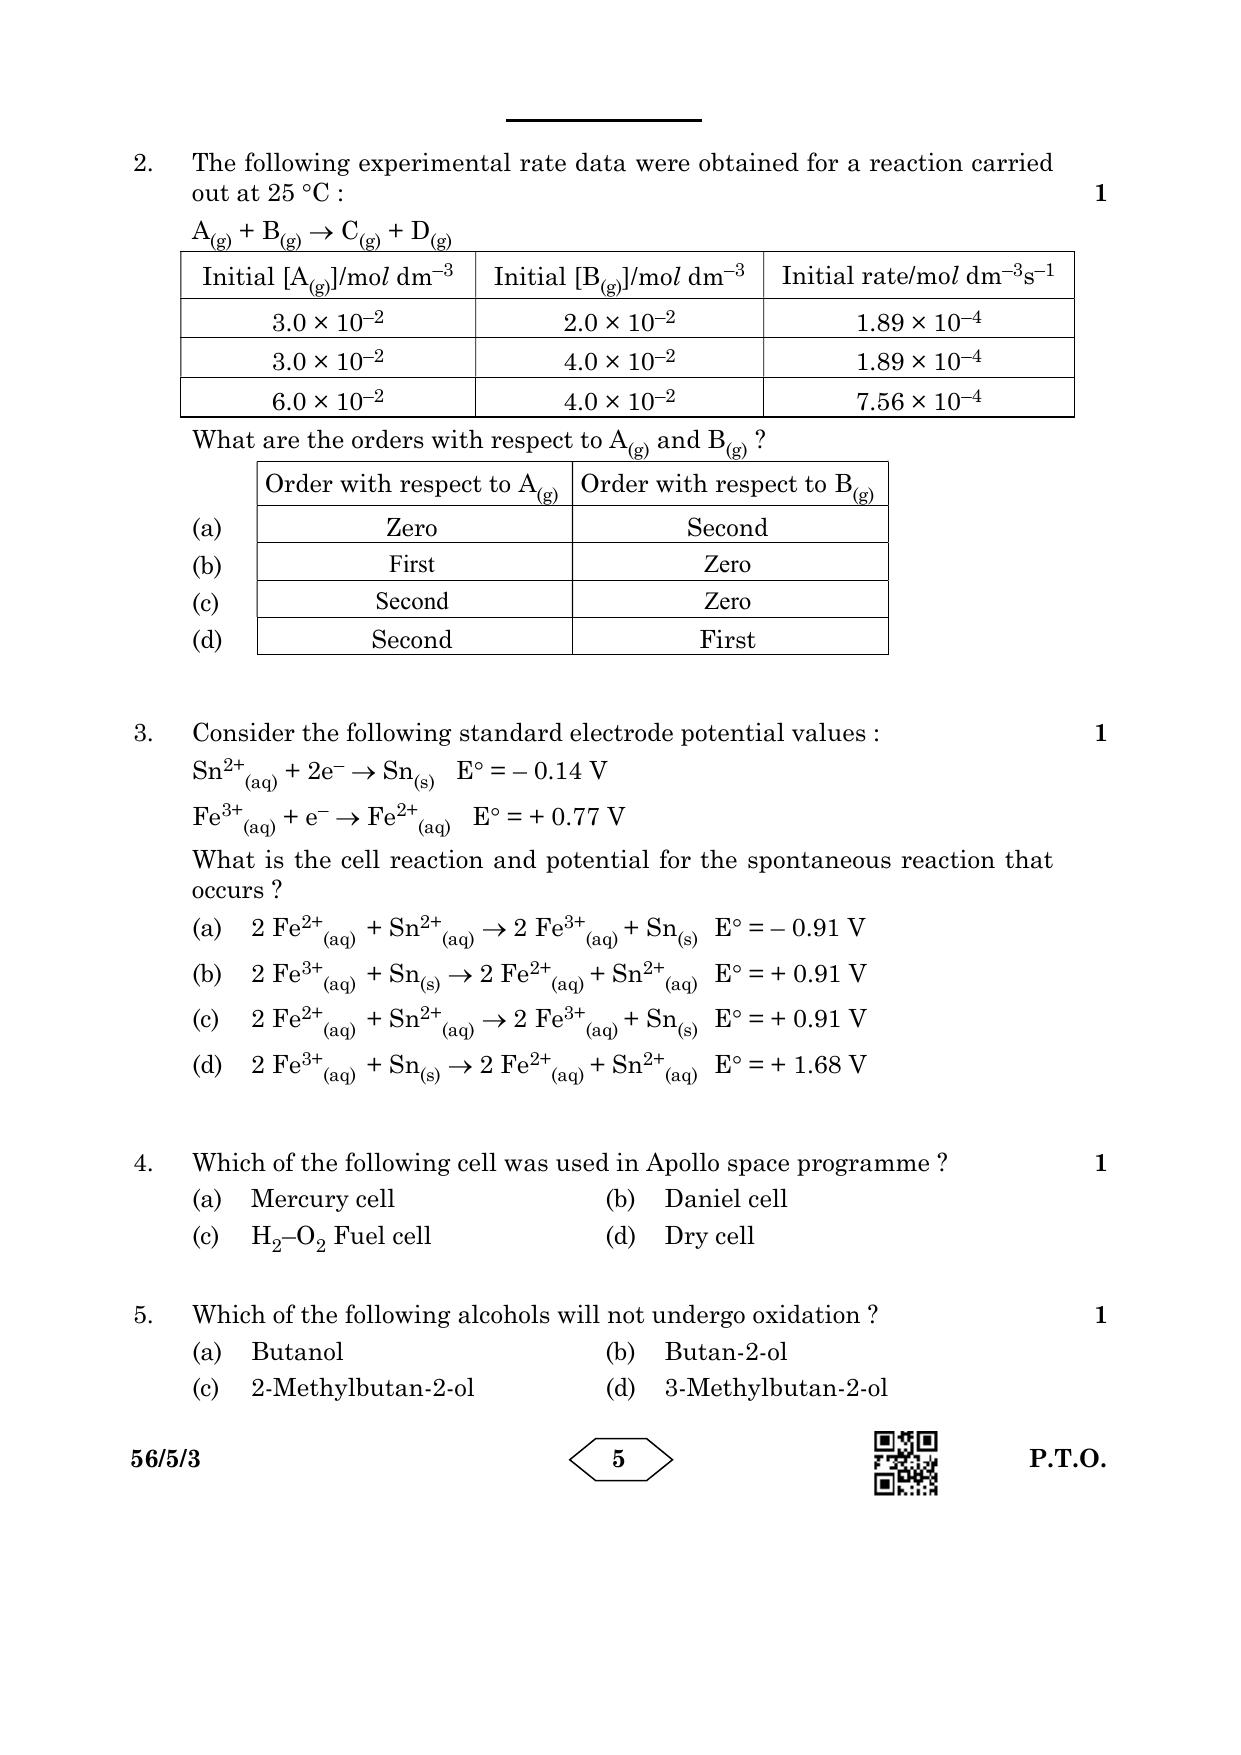 CBSE Class 12 56-5-3 Chemistry 2023 Question Paper - Page 5